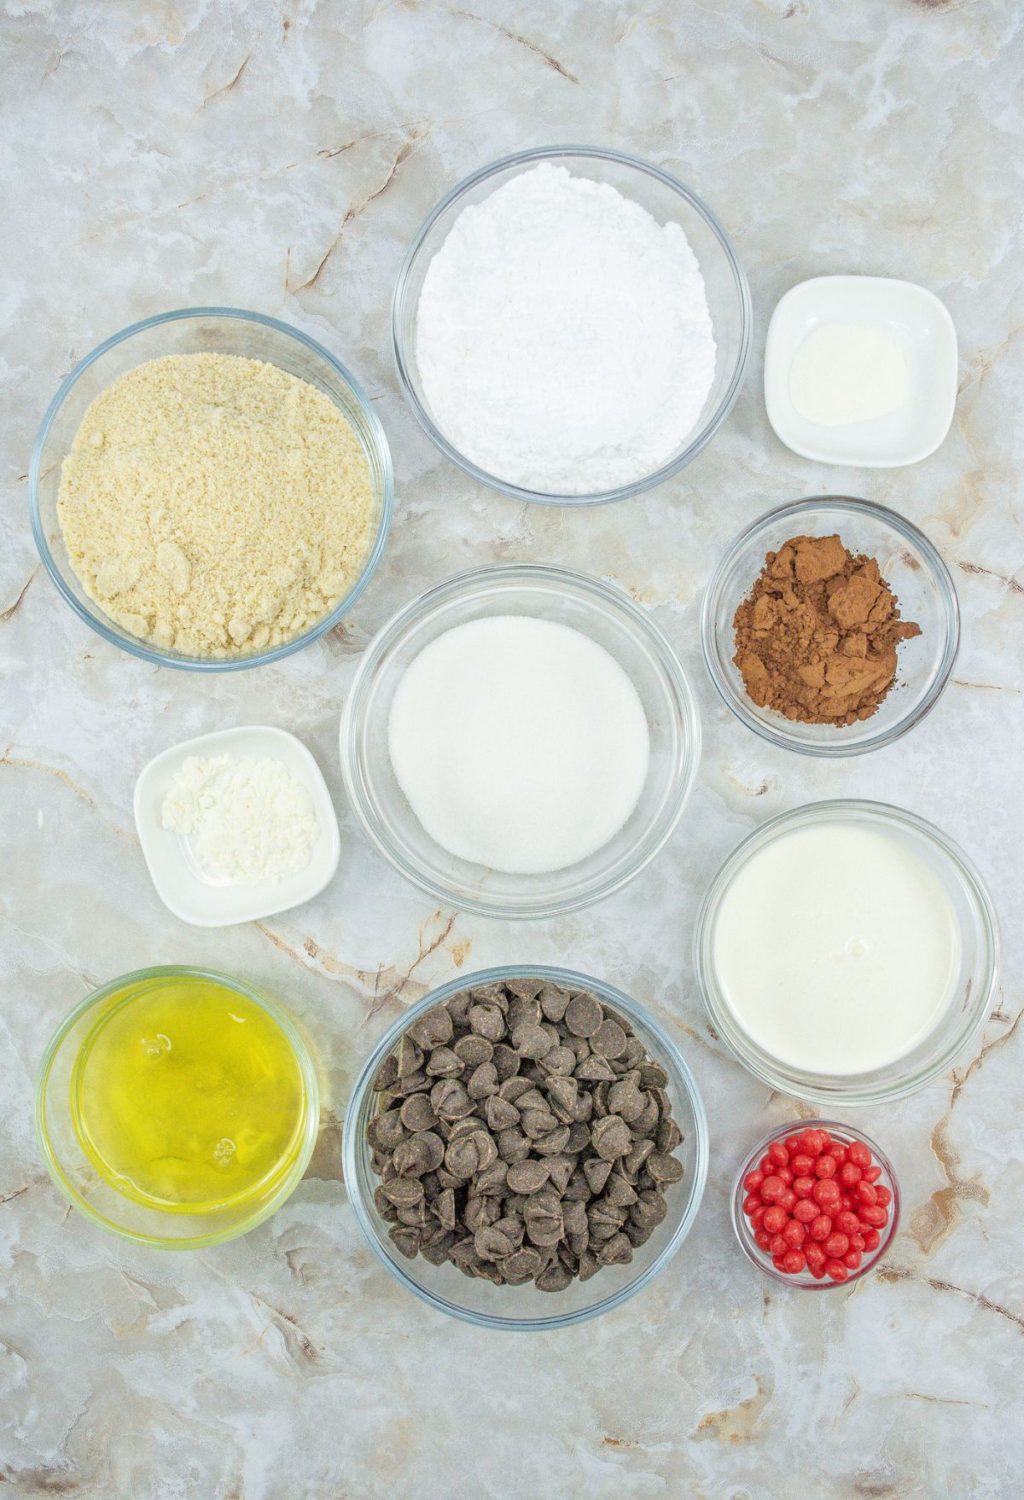 Ingredients for a chocolate cake in bowls on a marble surface.